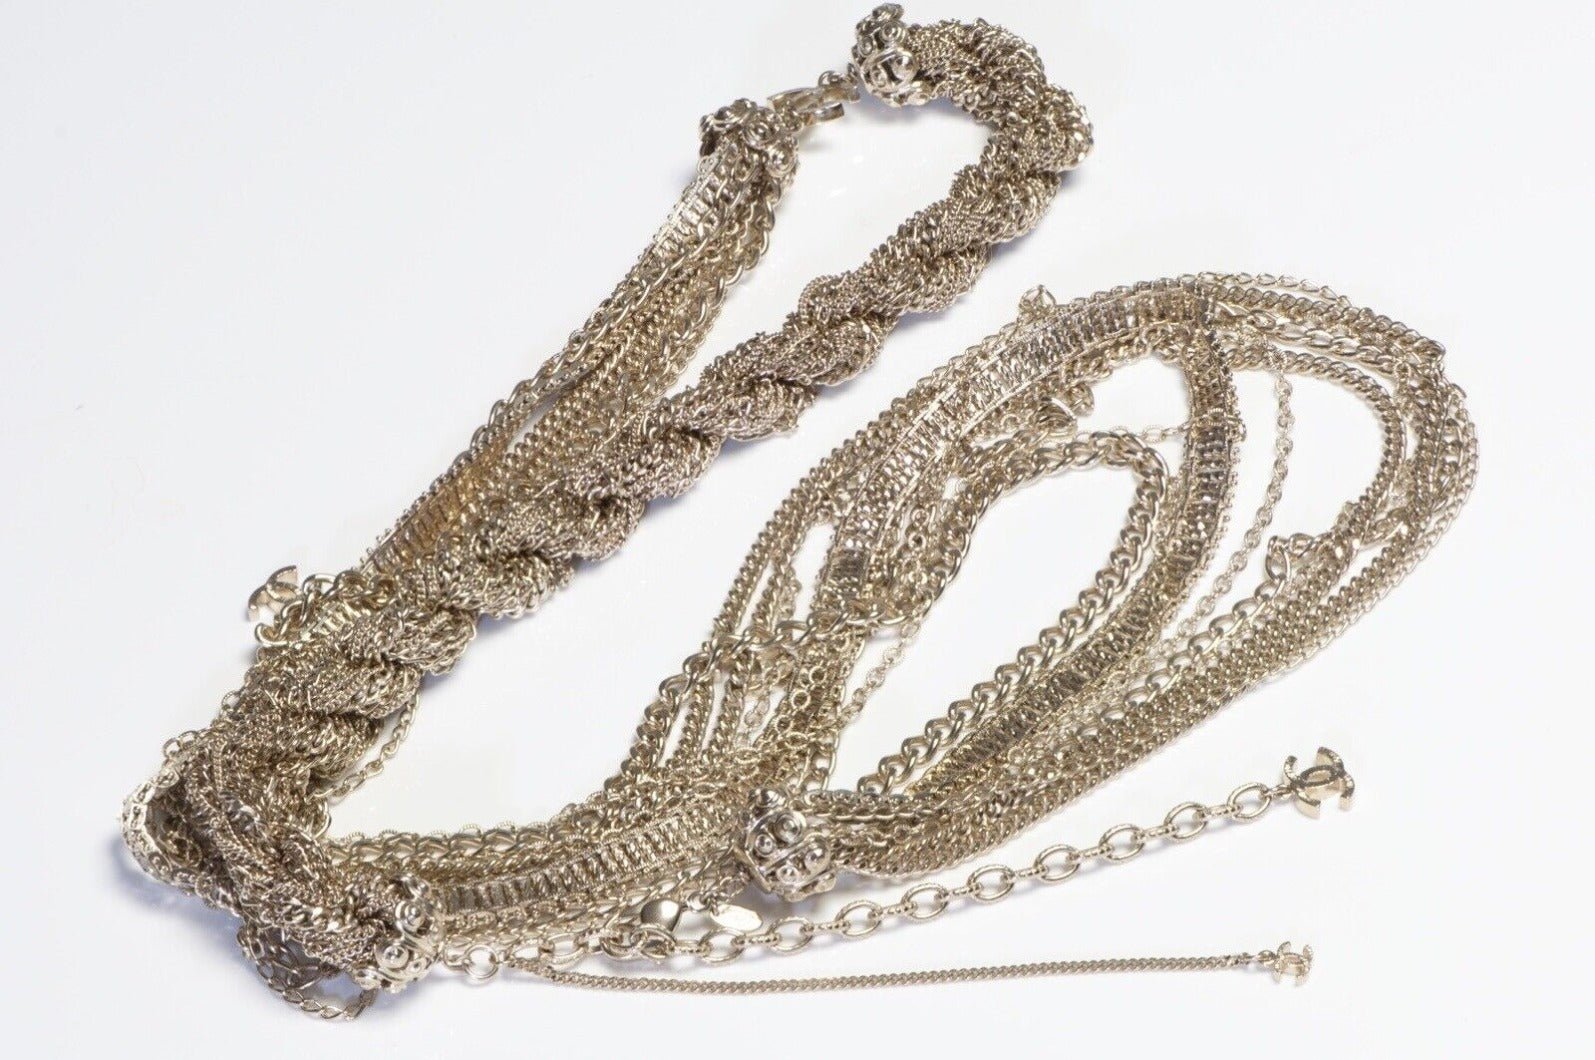 CHANEL Paris Spring 2009 Champagne Gold Multi Strand CC Rope Chain Necklace